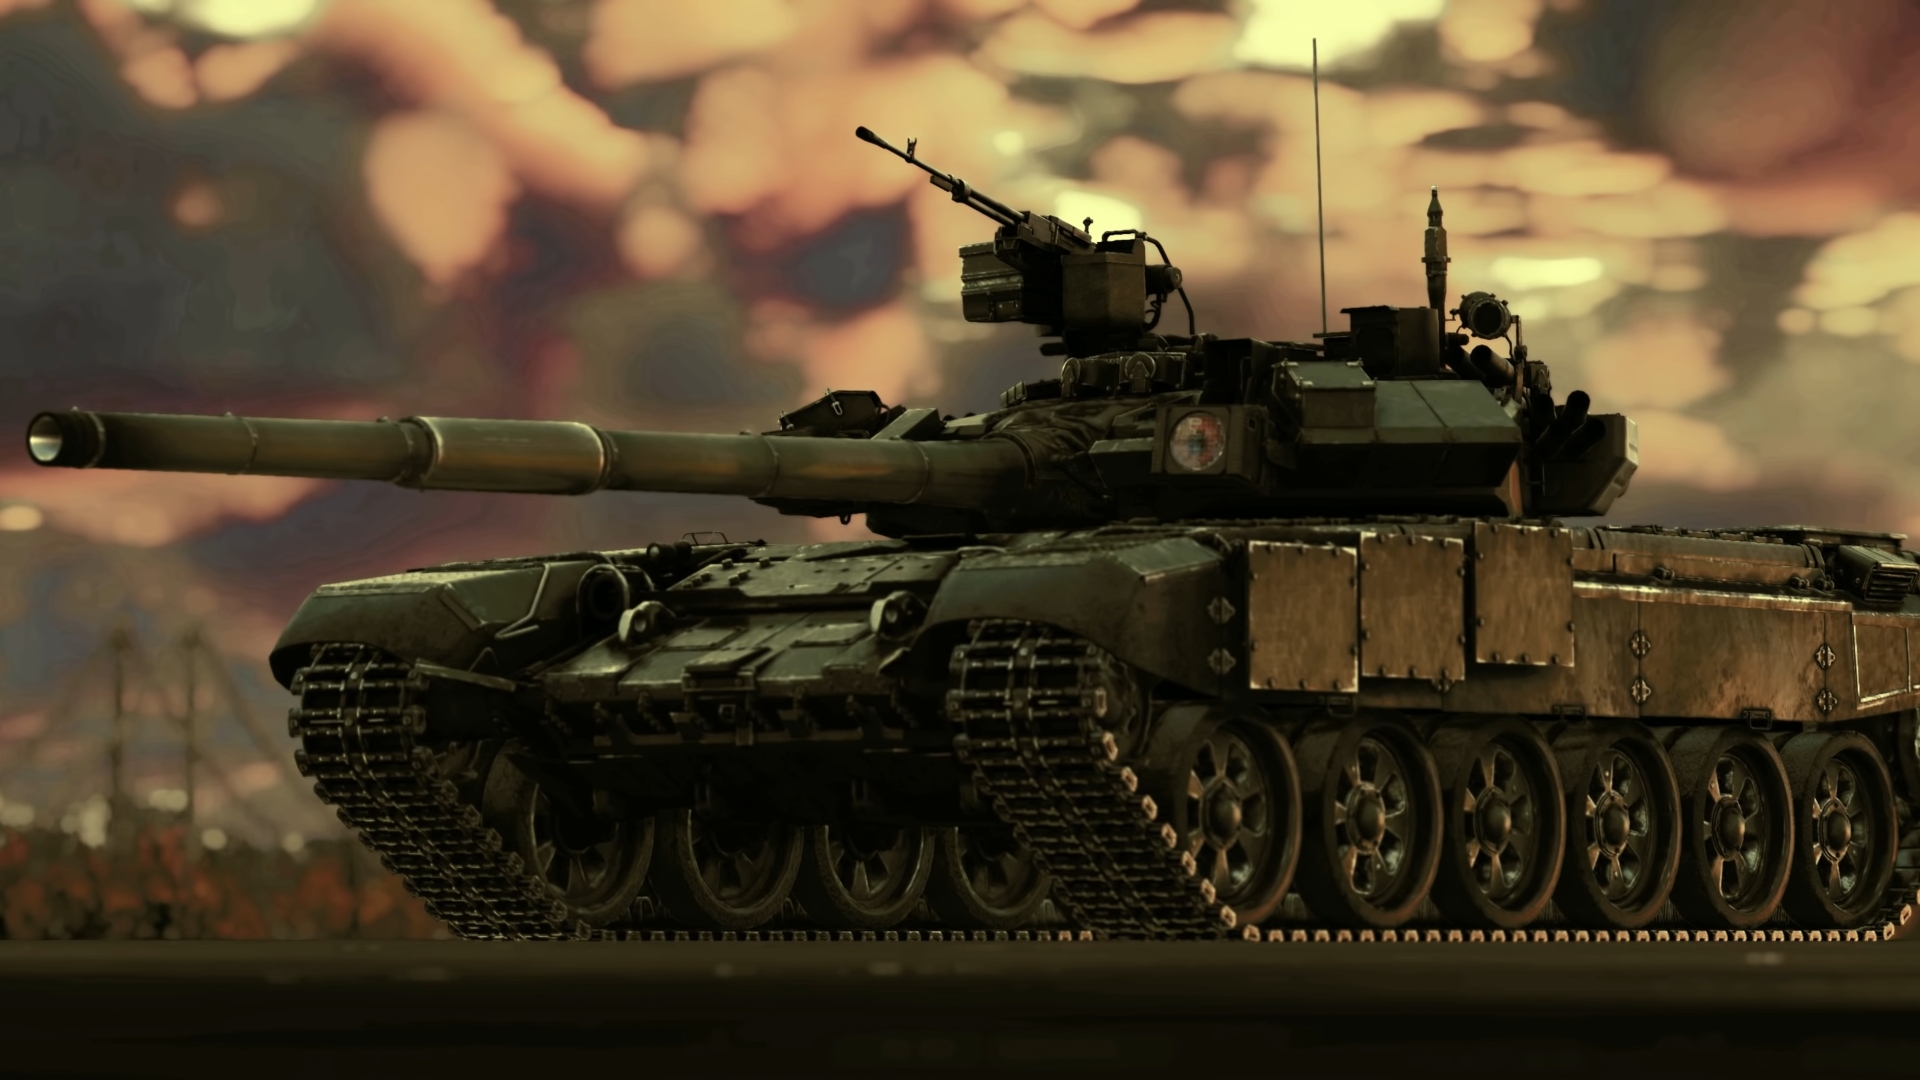 best tank games: a standard military tank in front of a sunset sky